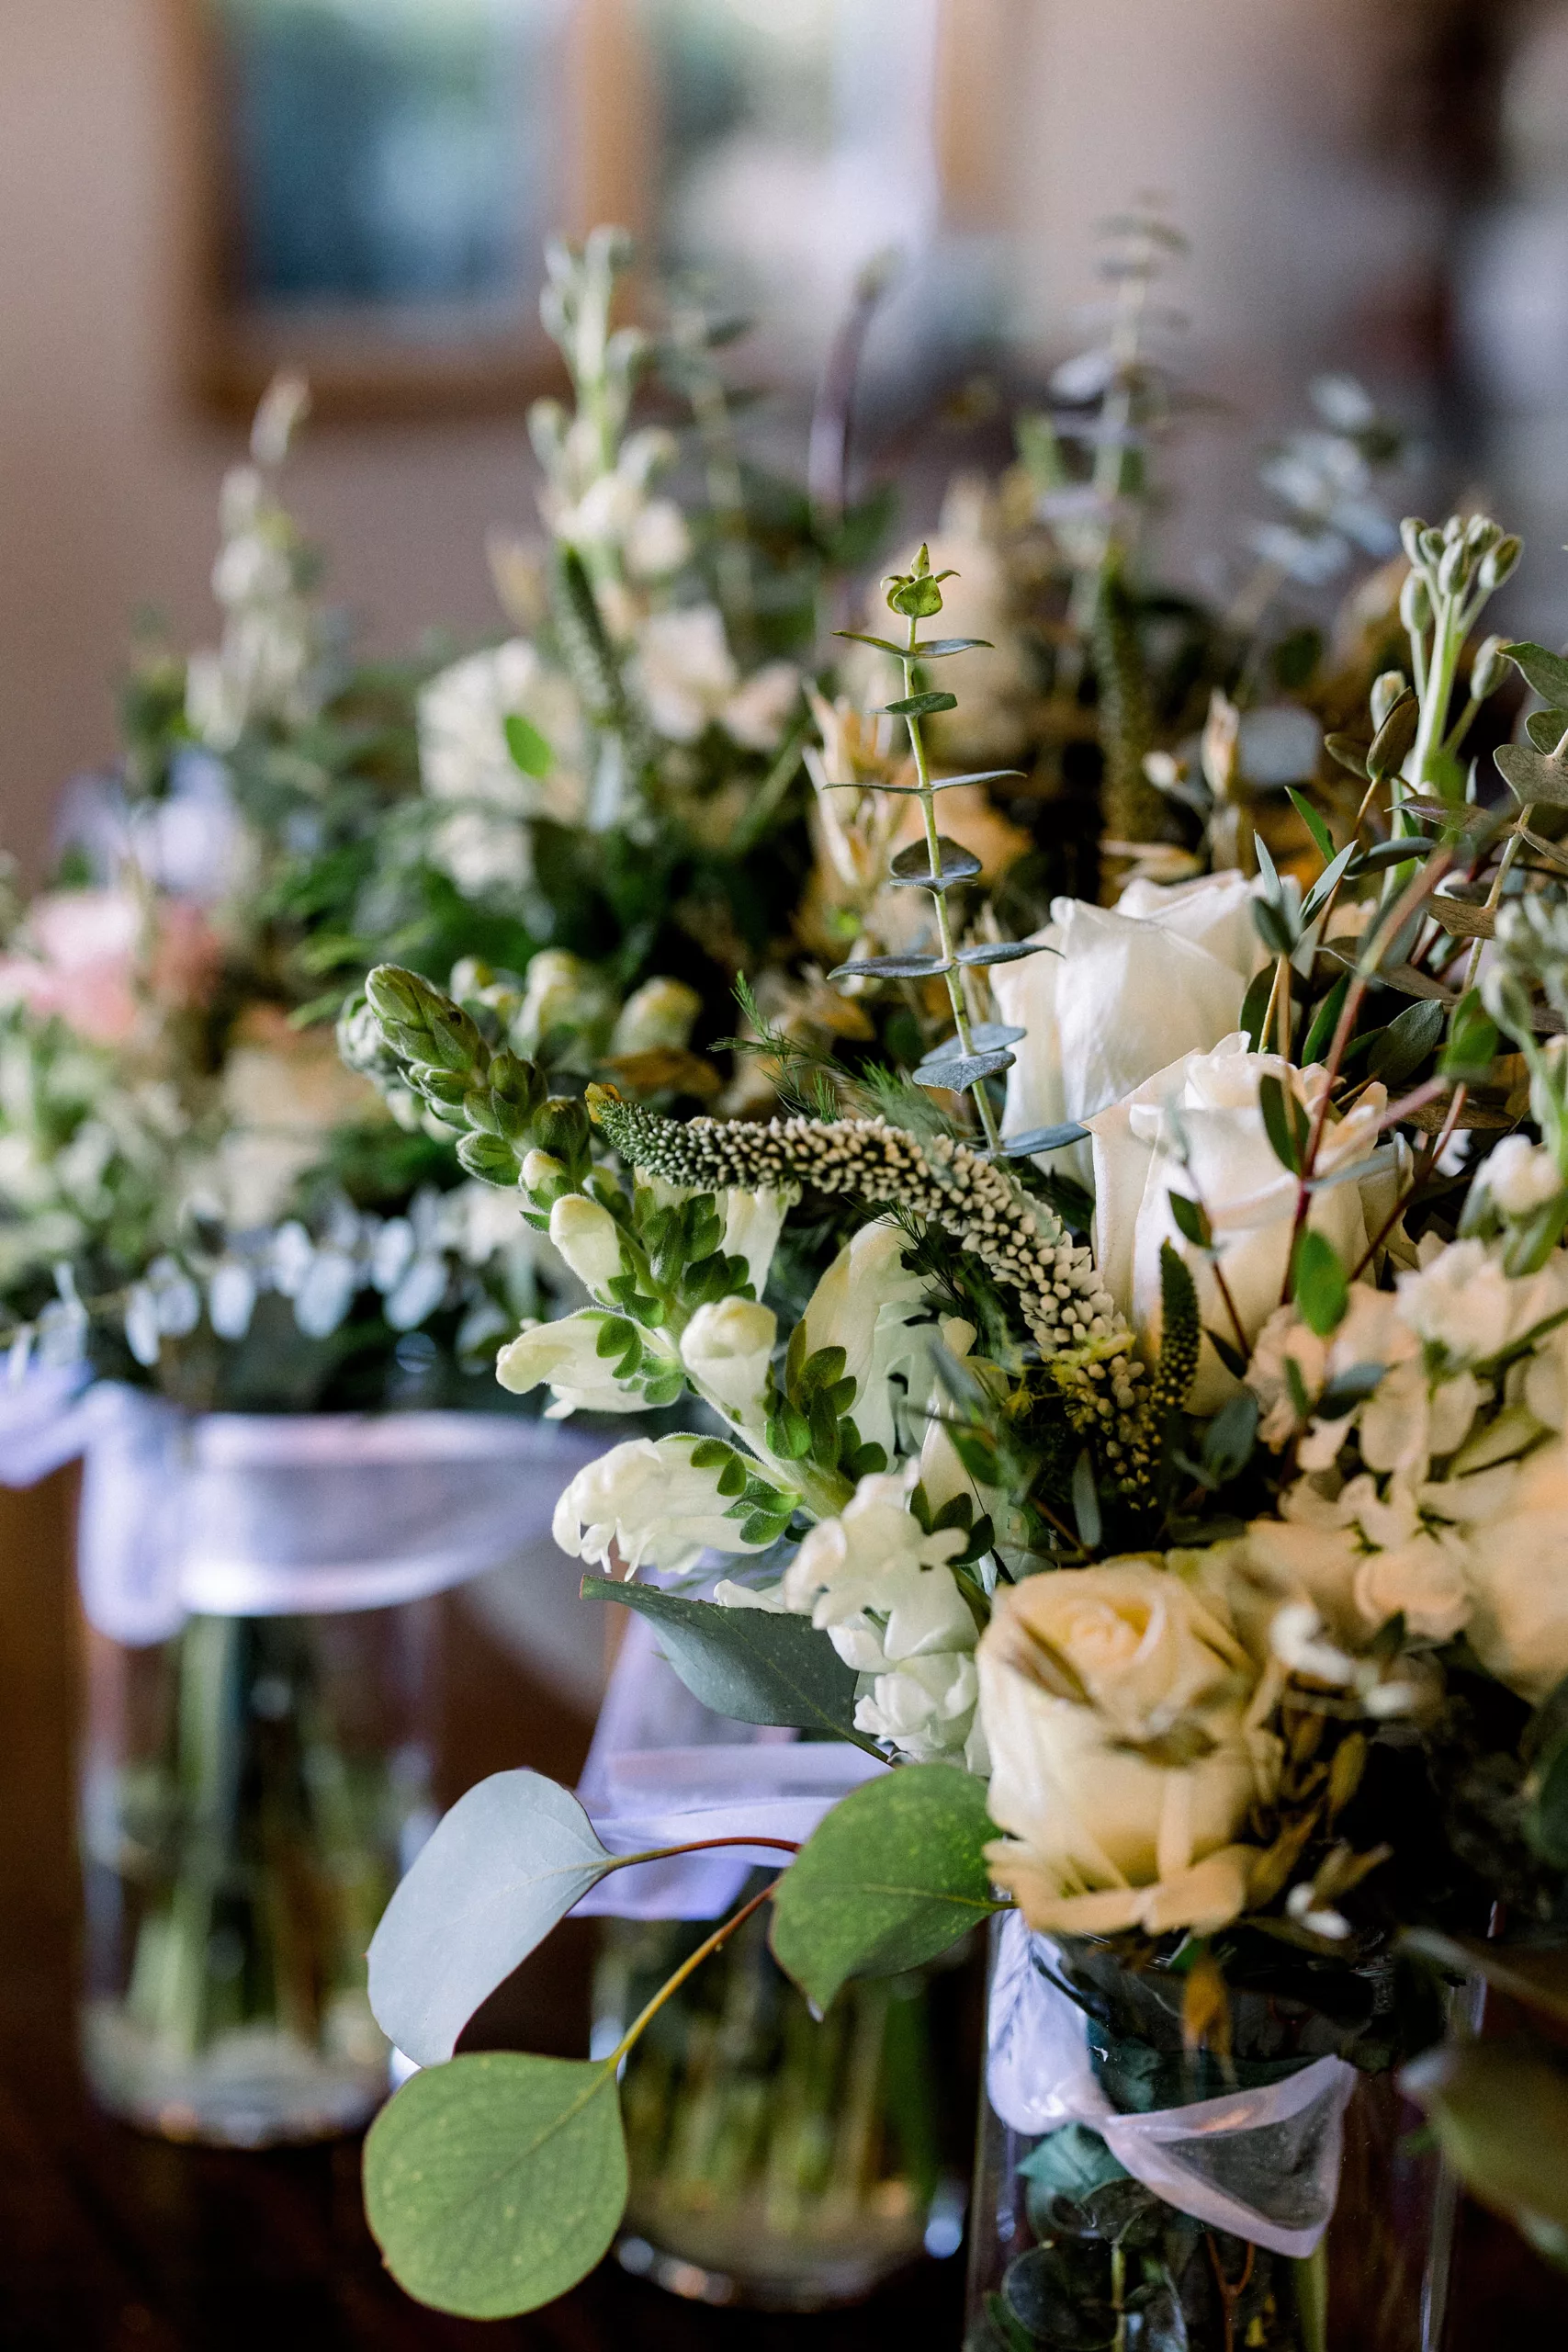 Details of centerpieces with white roses for a wedding reception